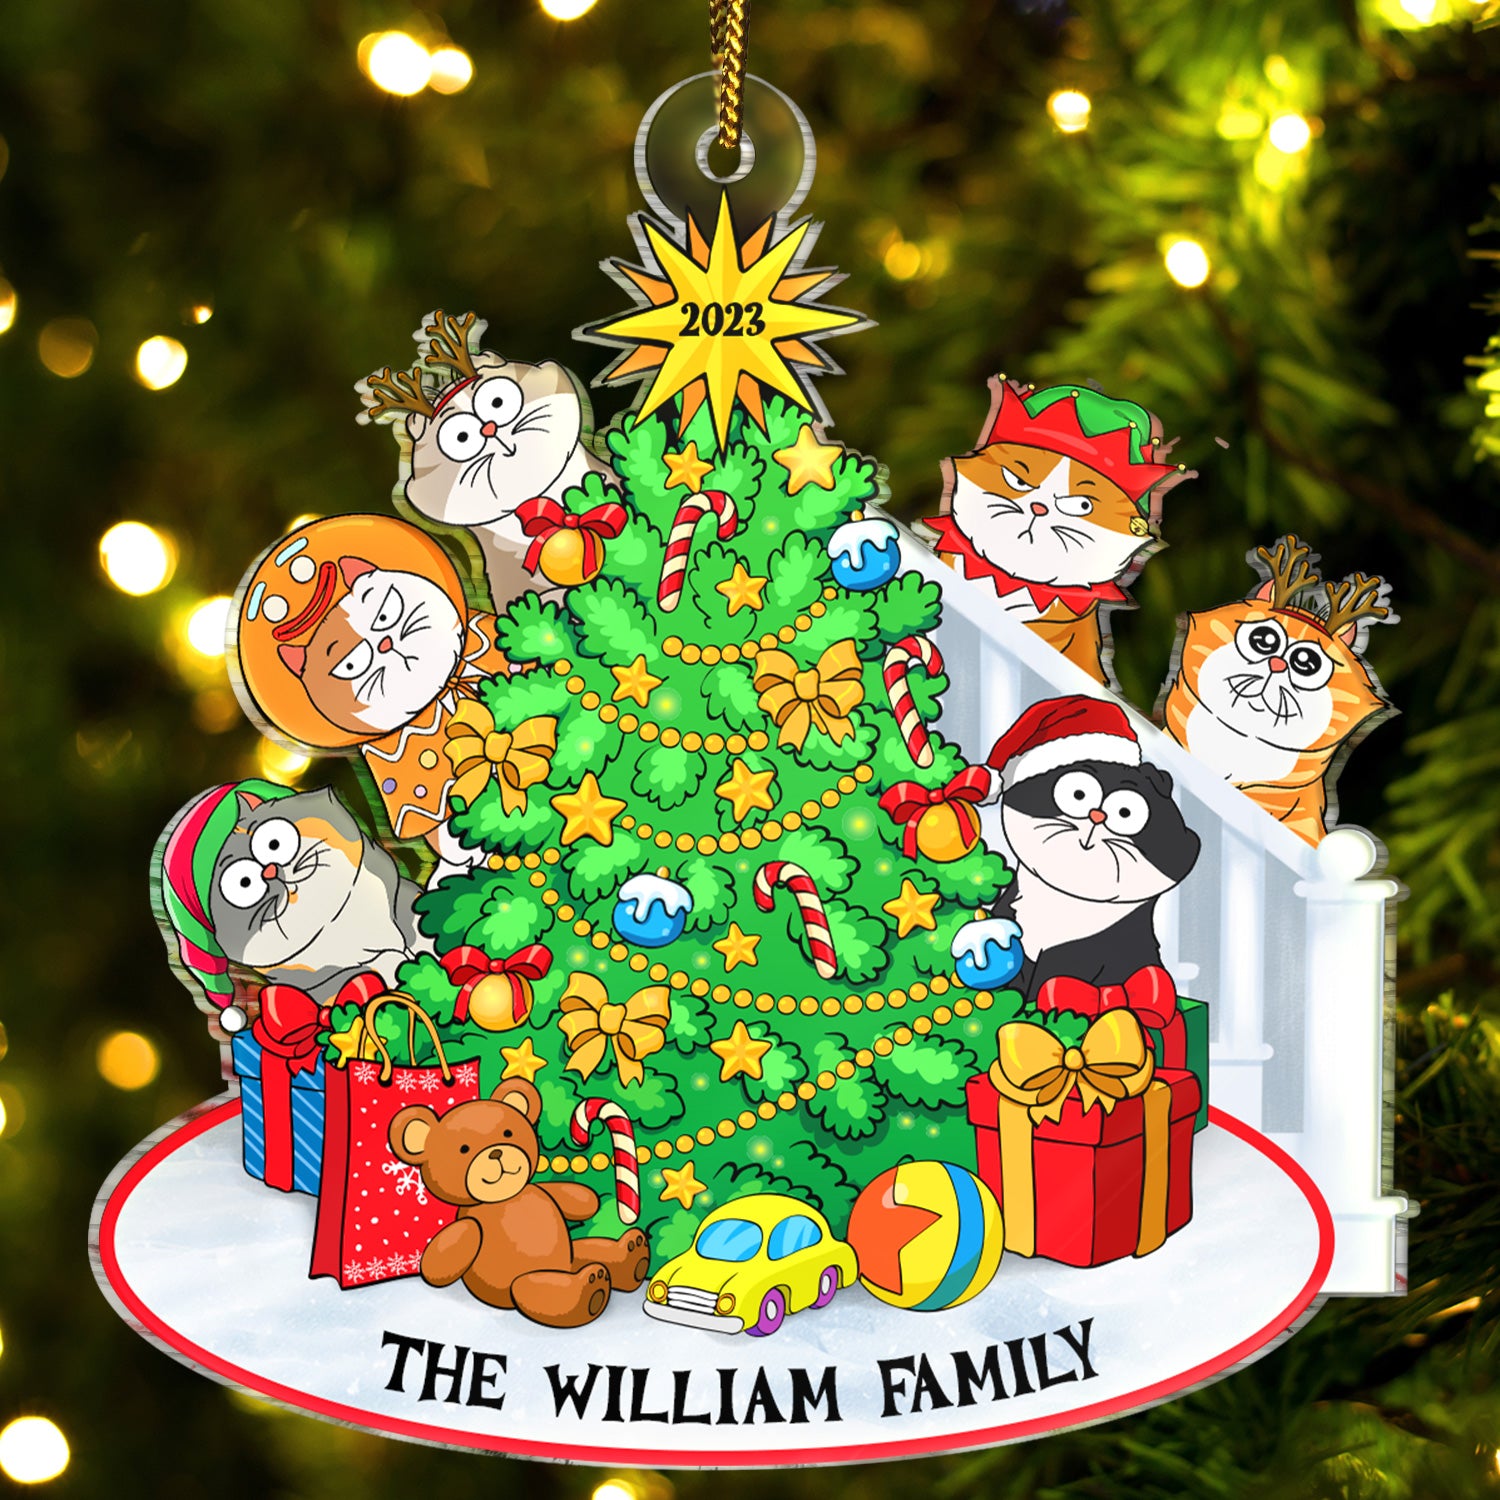 Peeking Cartoon Cats - Christmas Gift For Cat Lovers - Personalized Cutout Acrylic Ornament